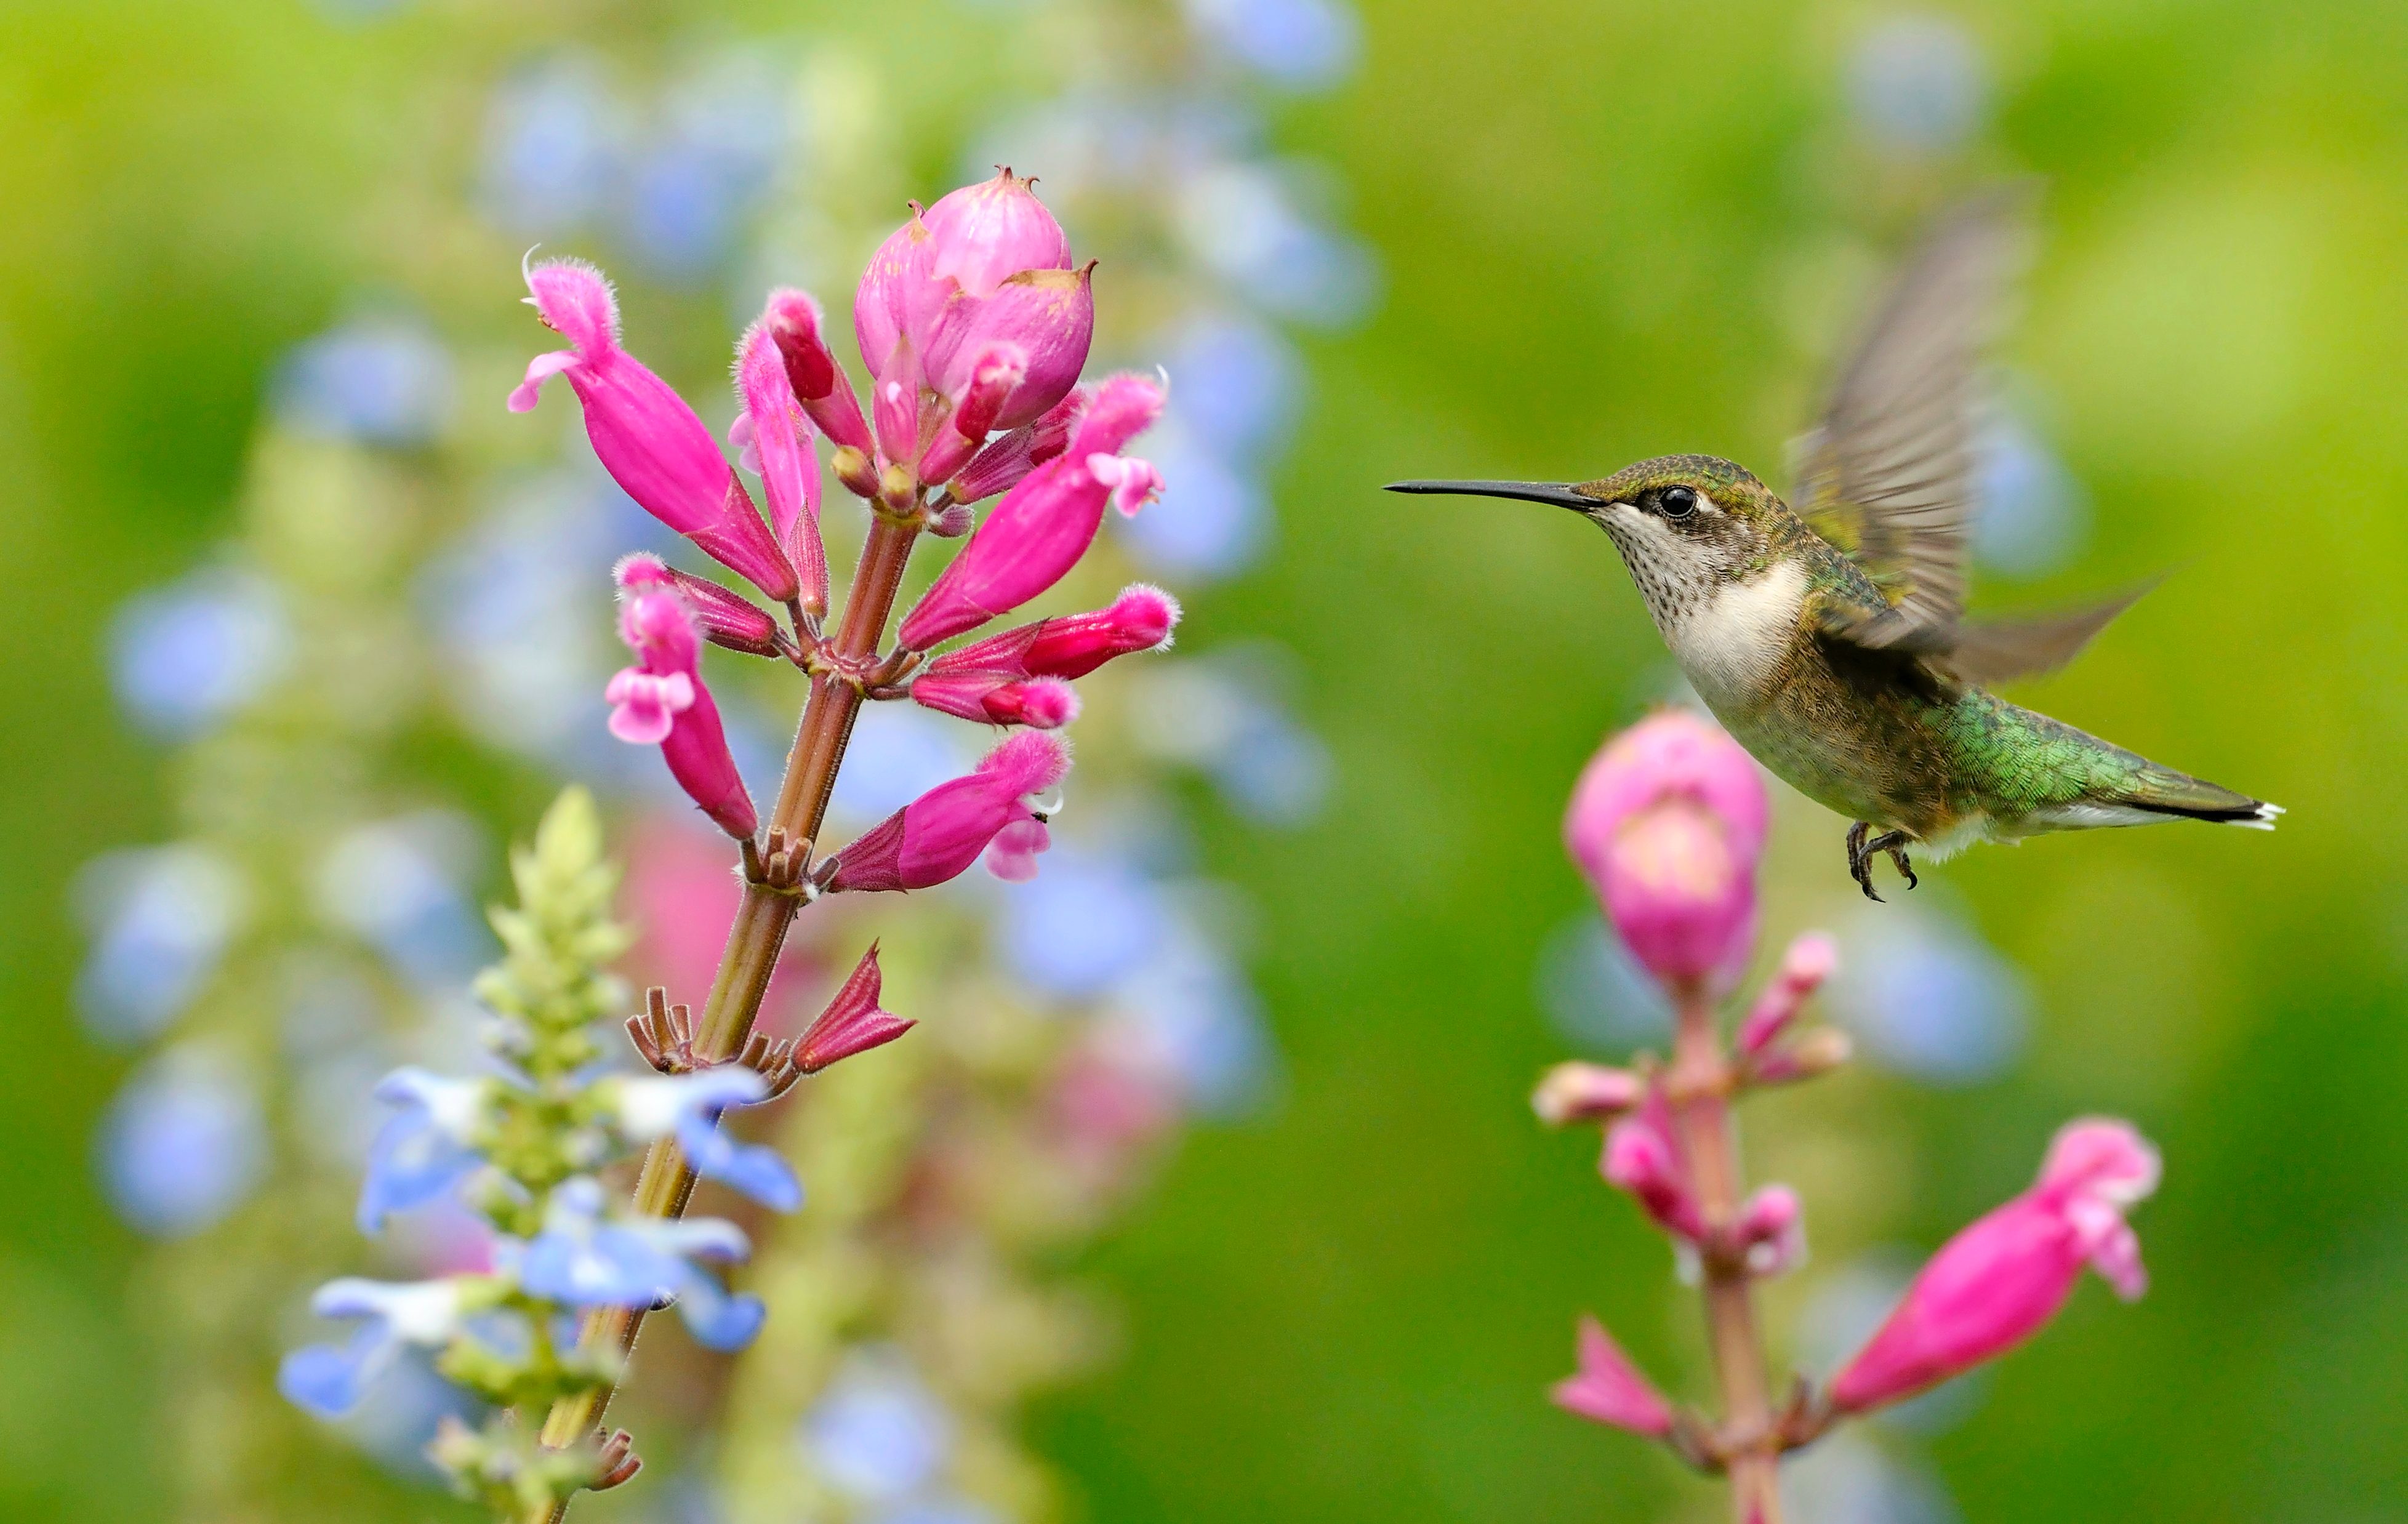 14 Proven Hummingbird Photography Tips - Birds and Blooms